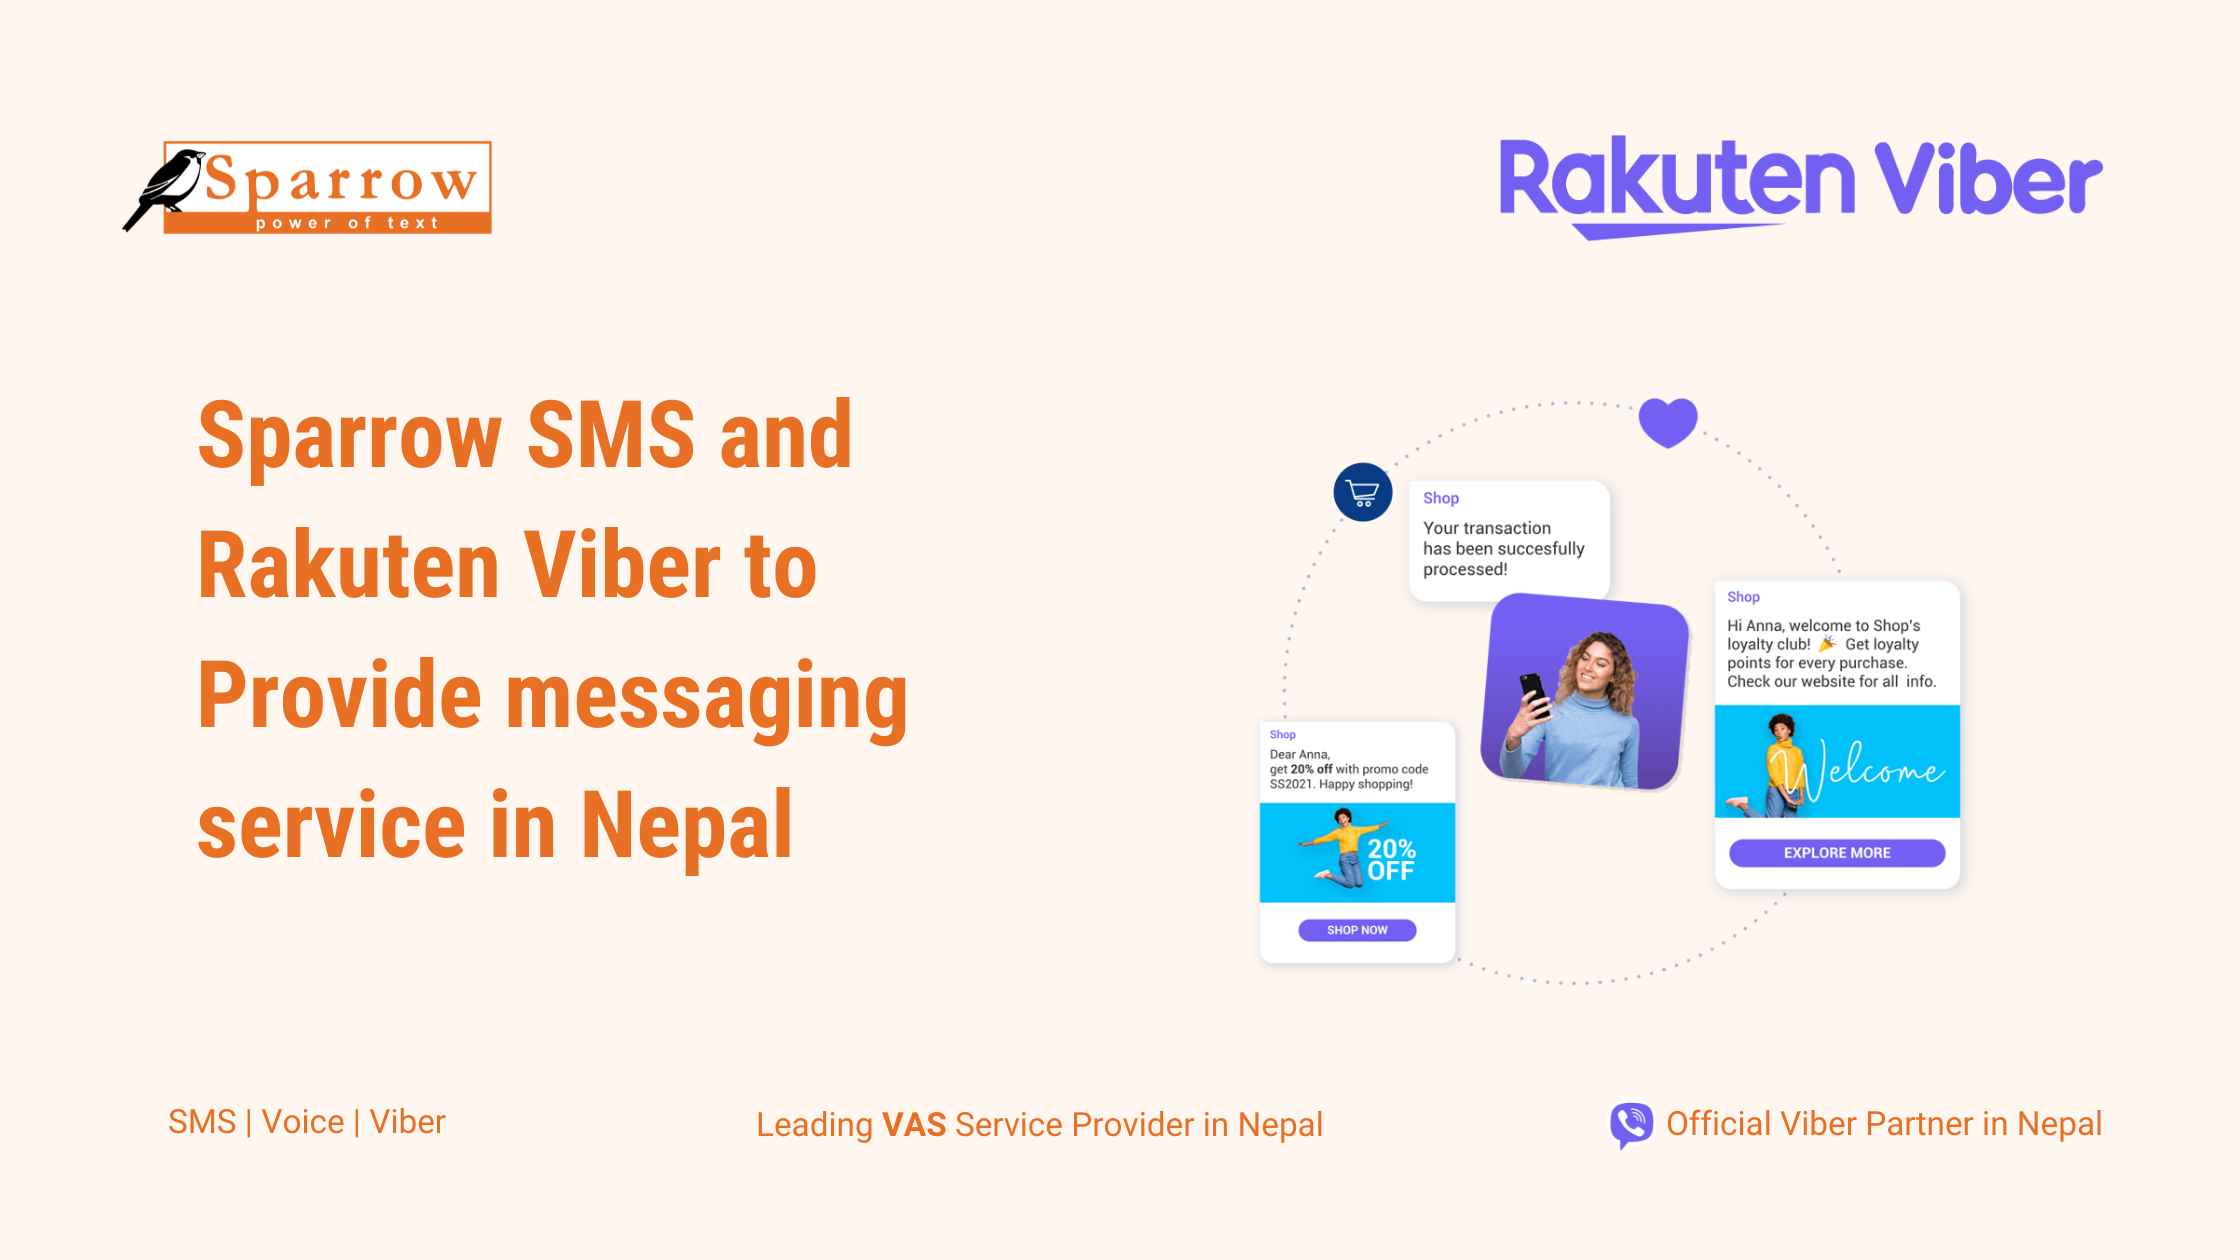 Sparrow SMS and Rakuten Viber to provide messaging service in Nepal